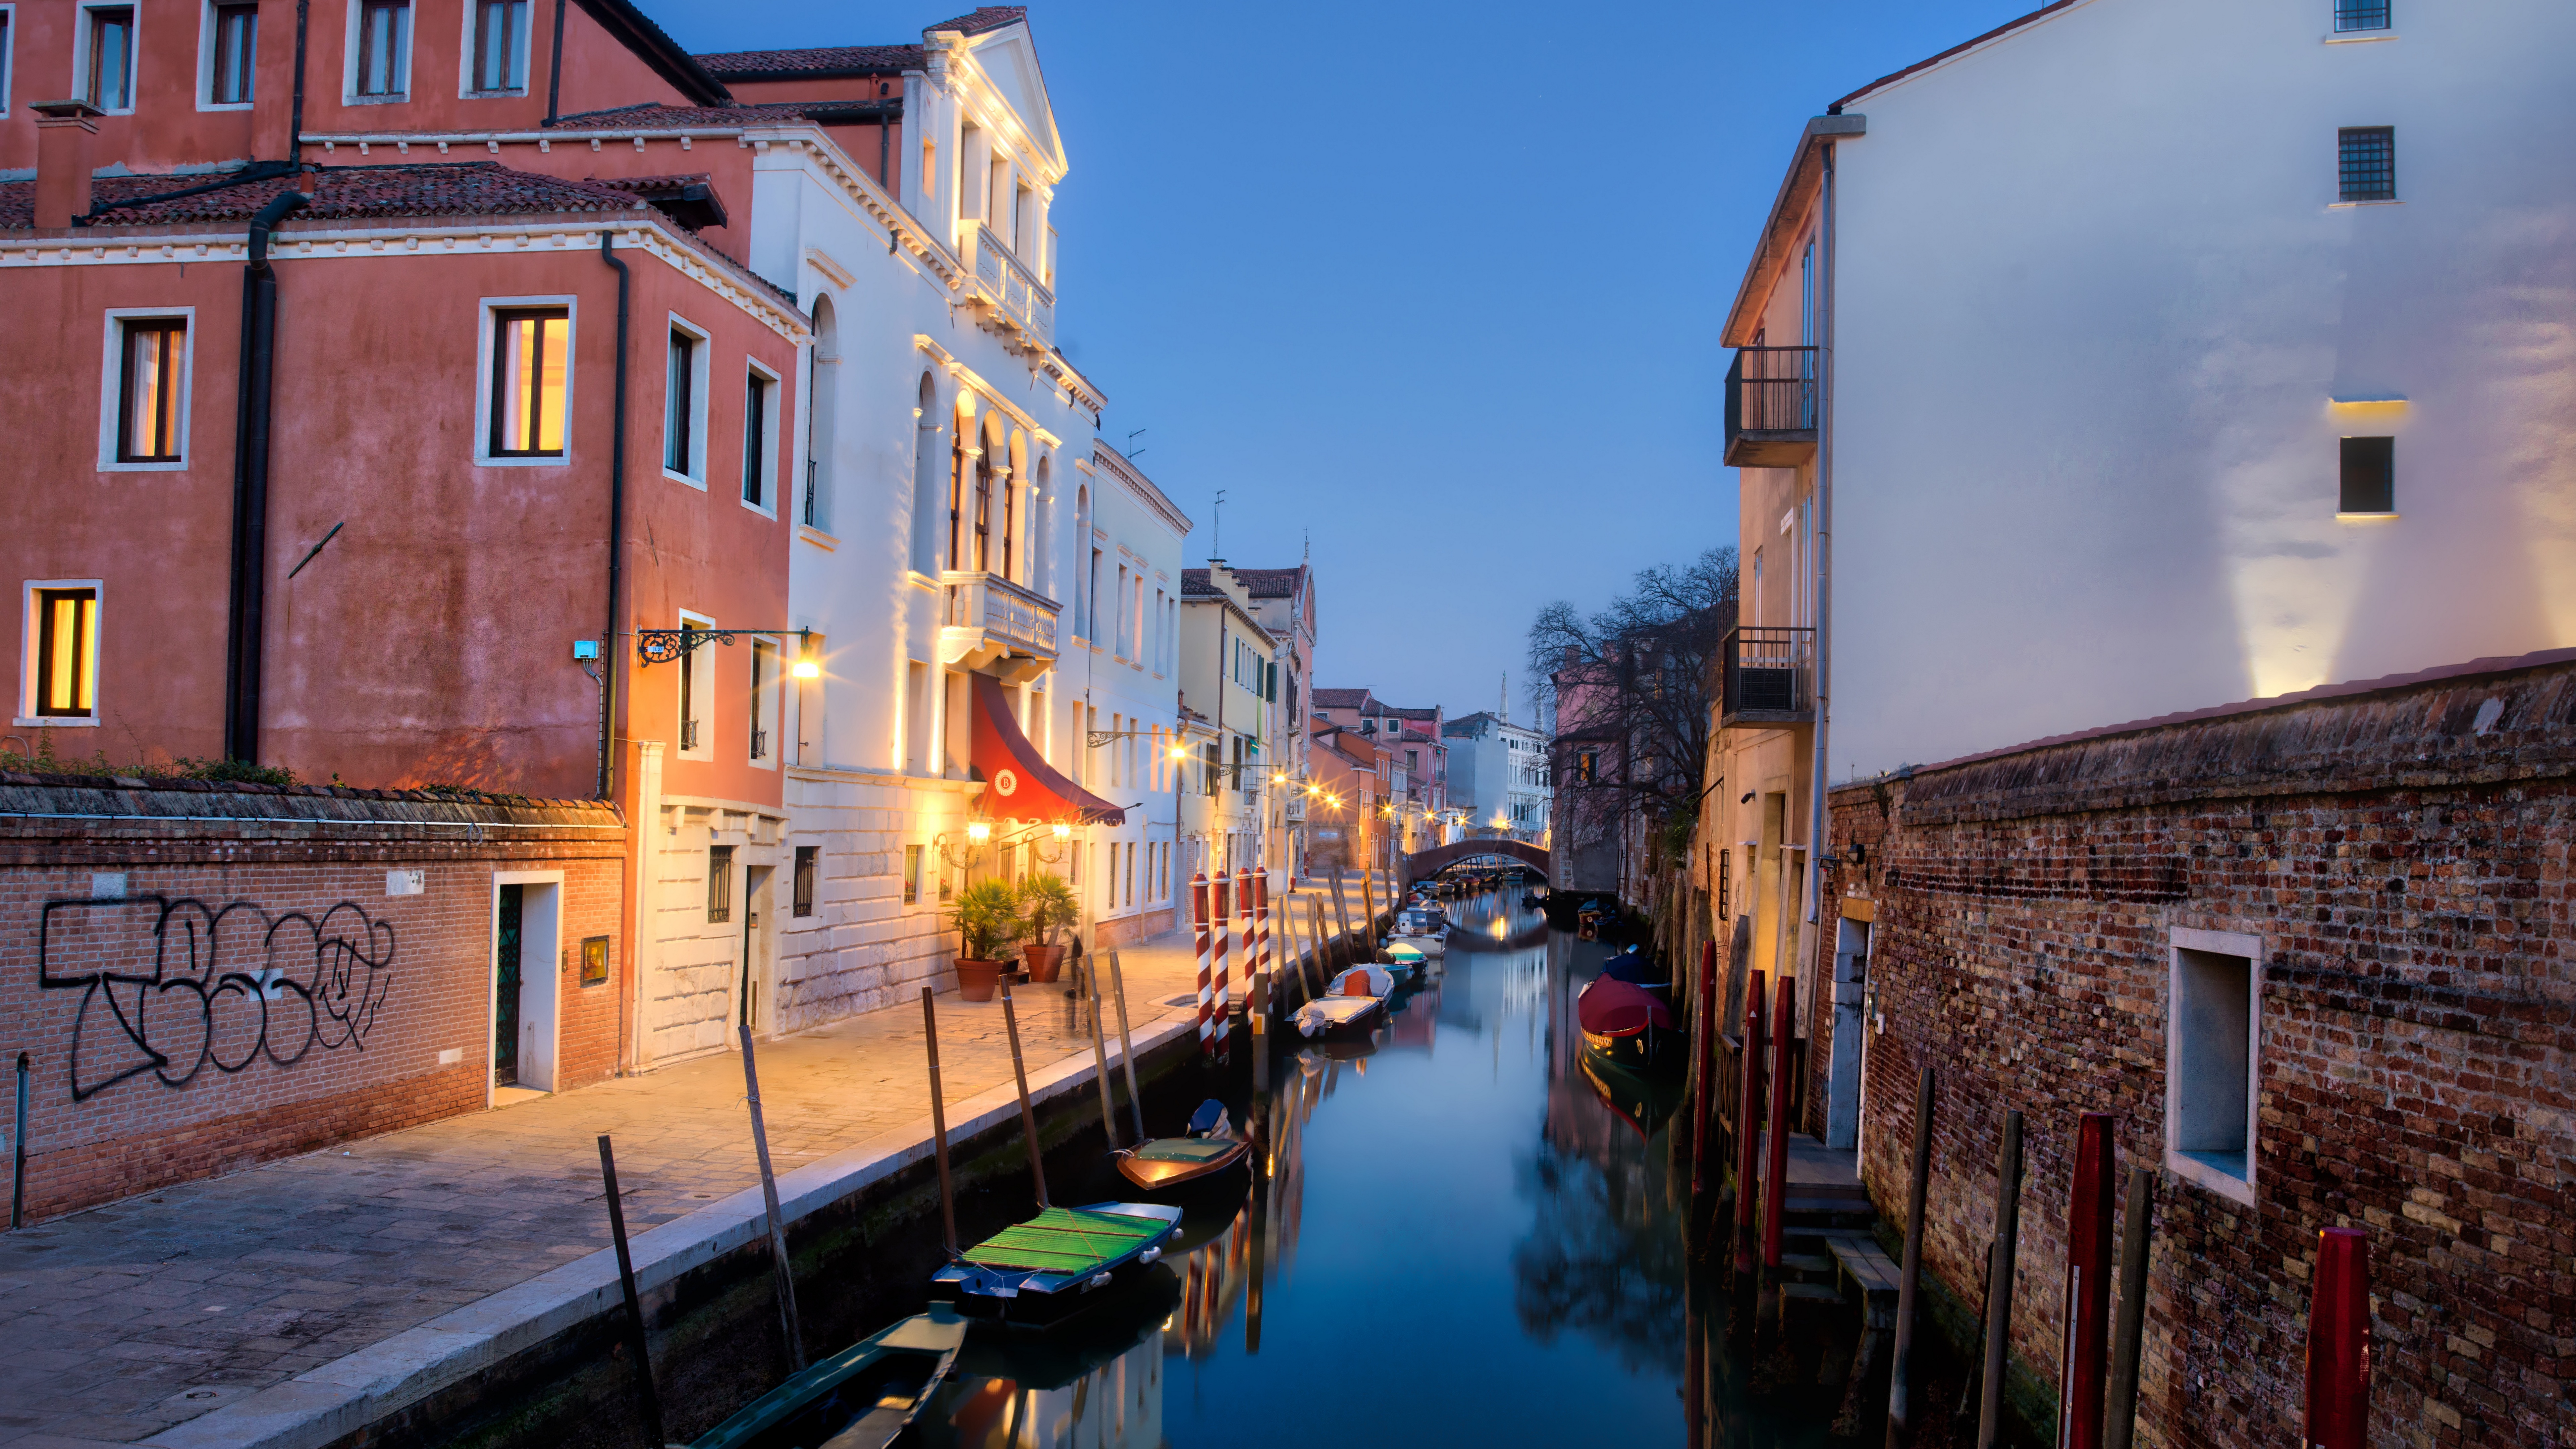 Photography Trey Ratcliff Cityscape Canal Boat Lights Italy Venice Water Building 7680x4320